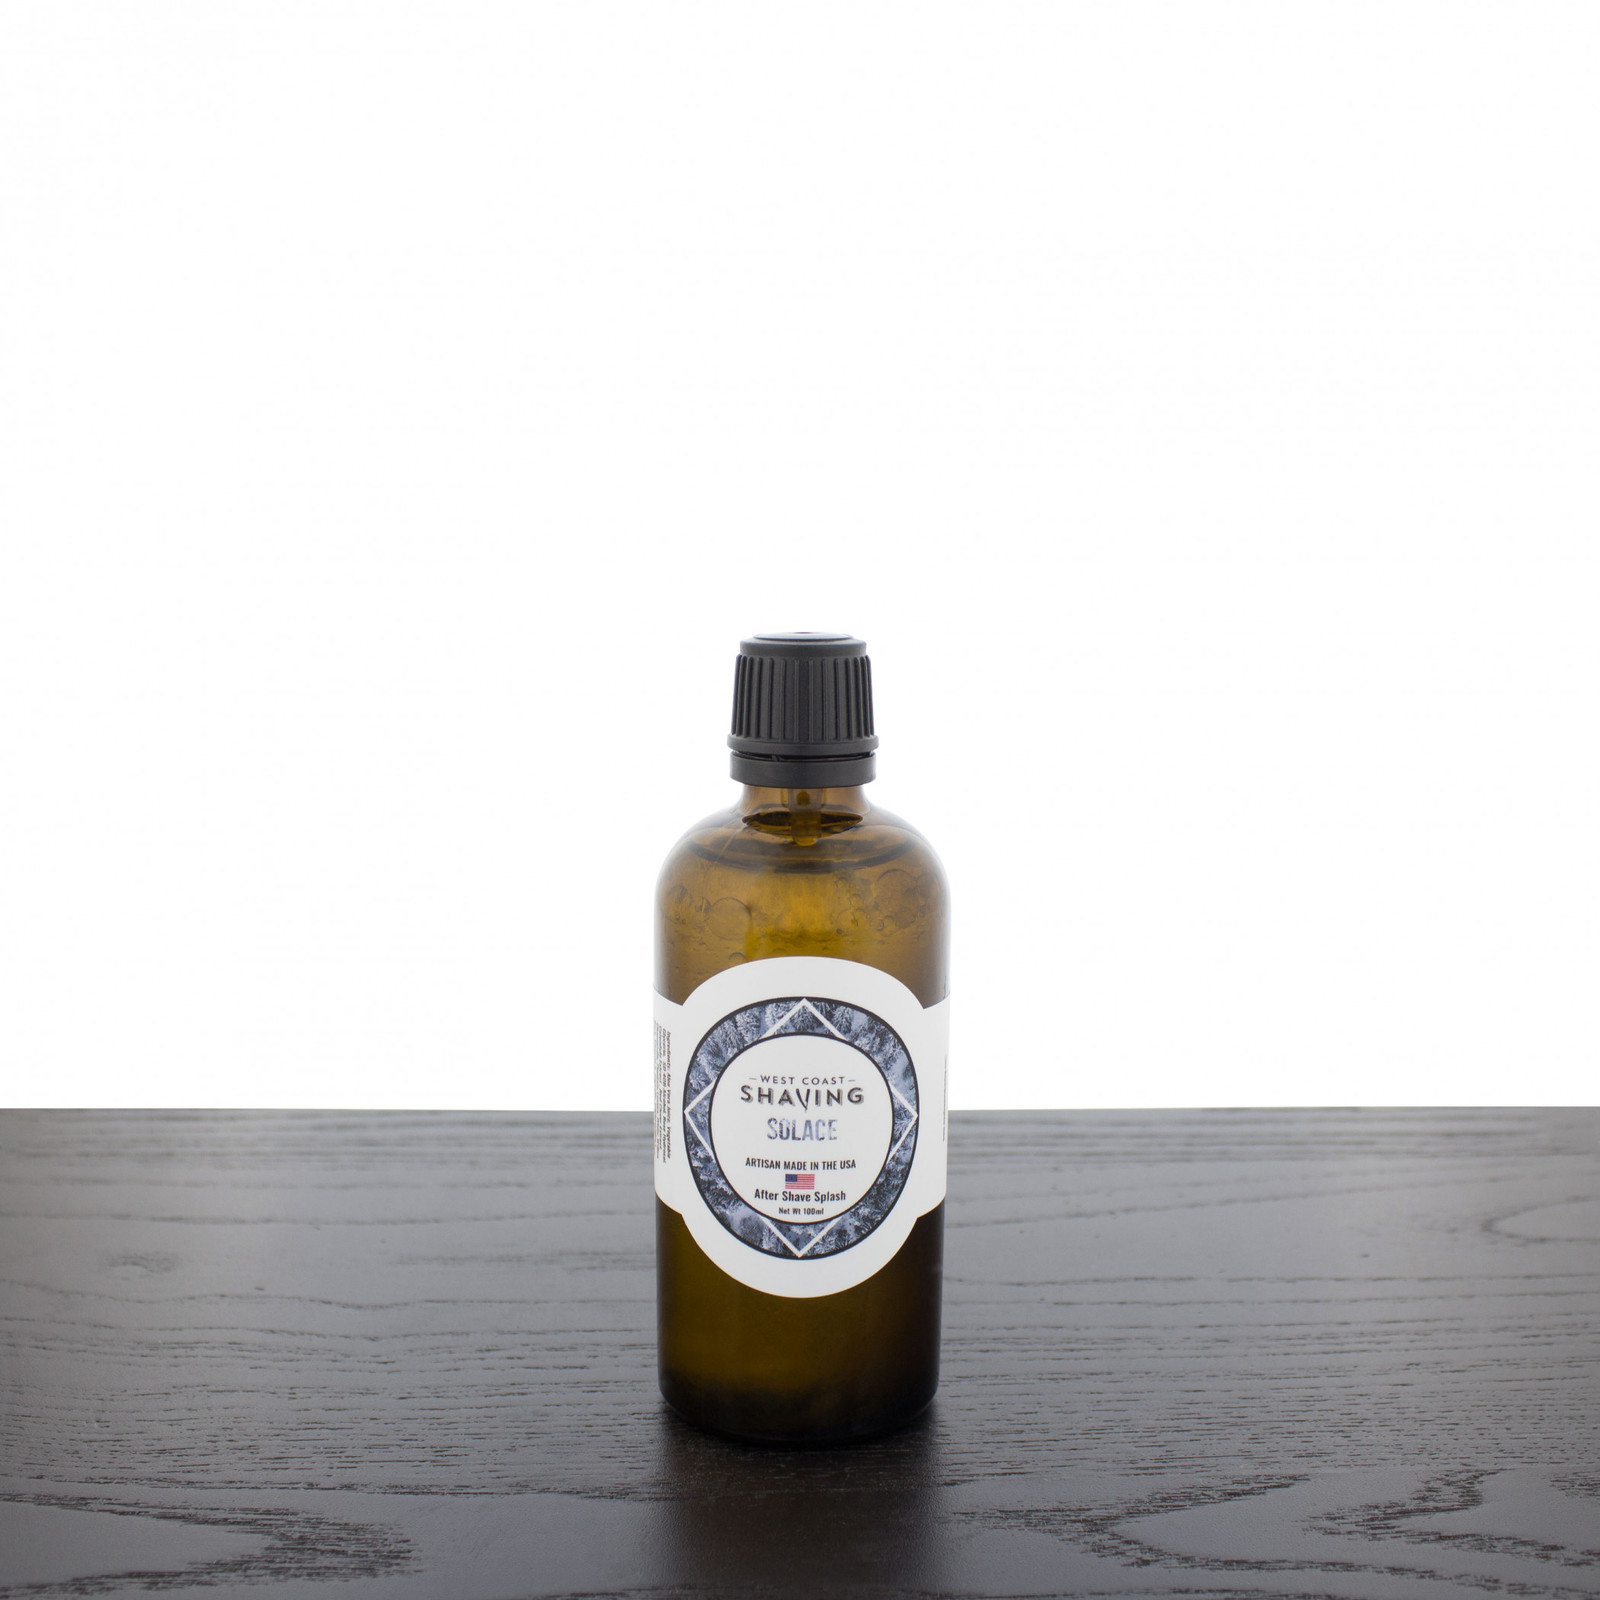 Primary image for West Coast Shaving After Shave Splash, Solace (Wintergreen)